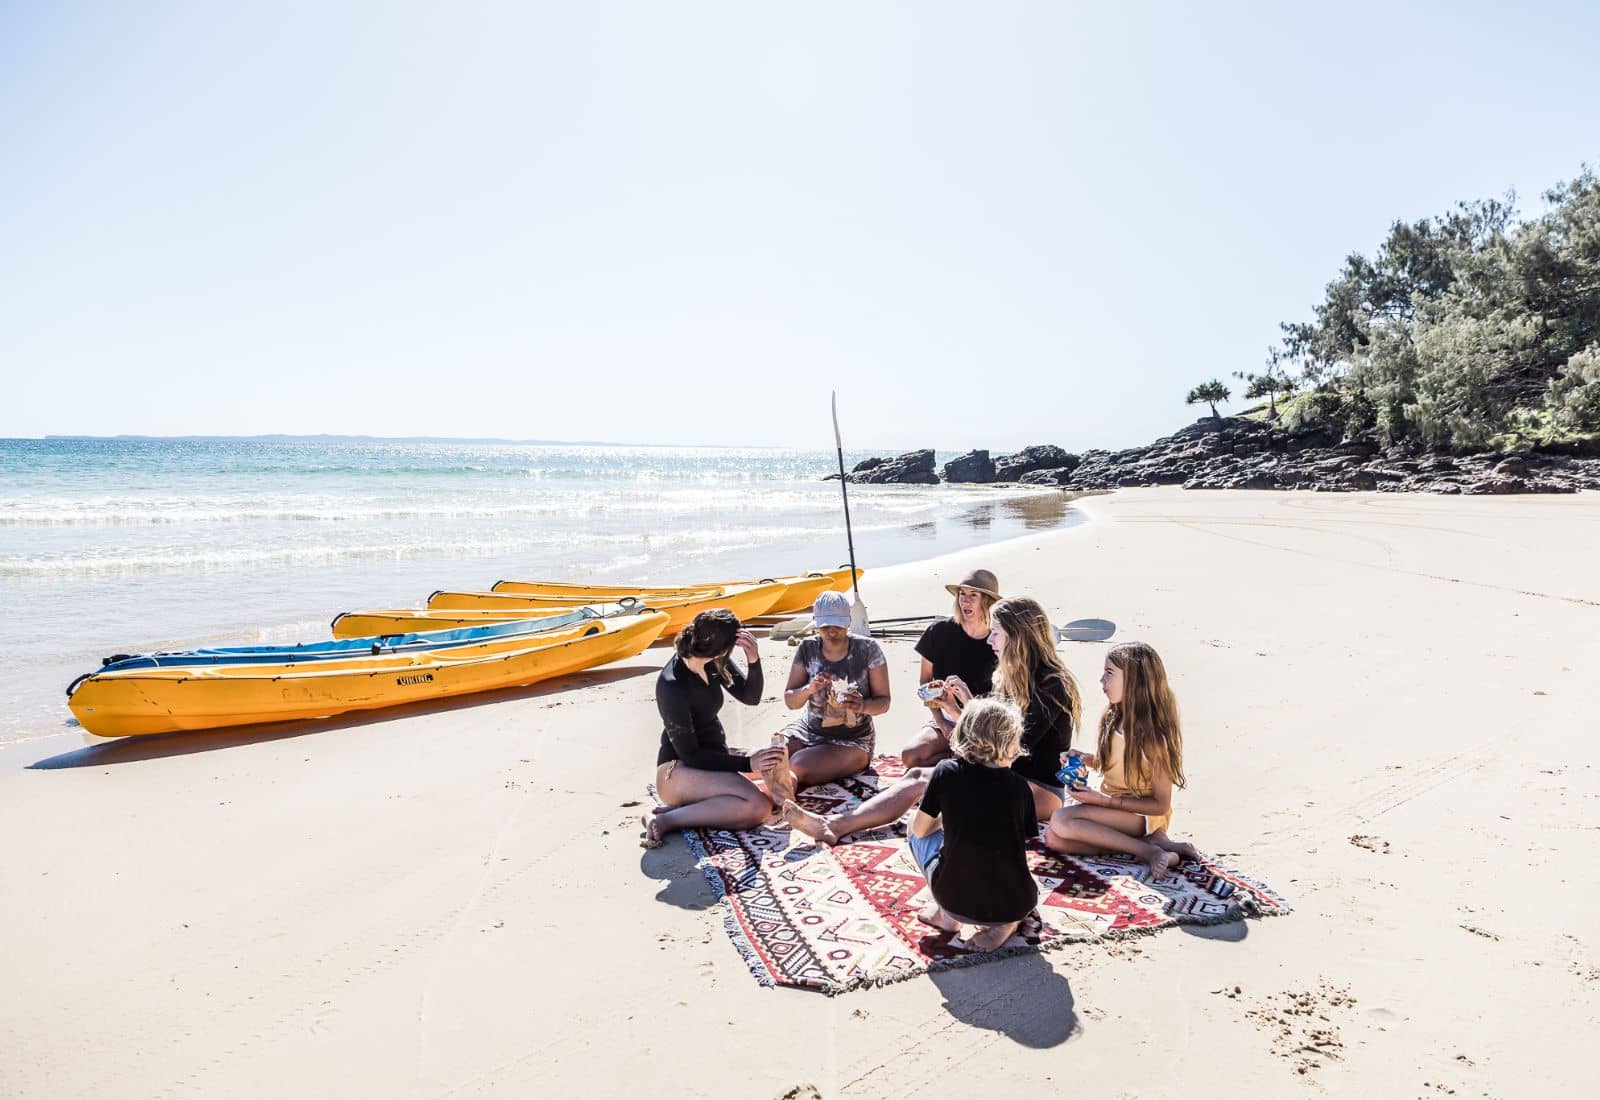 Epic Ocean Adventures Noosa -10% off Private Group Tours